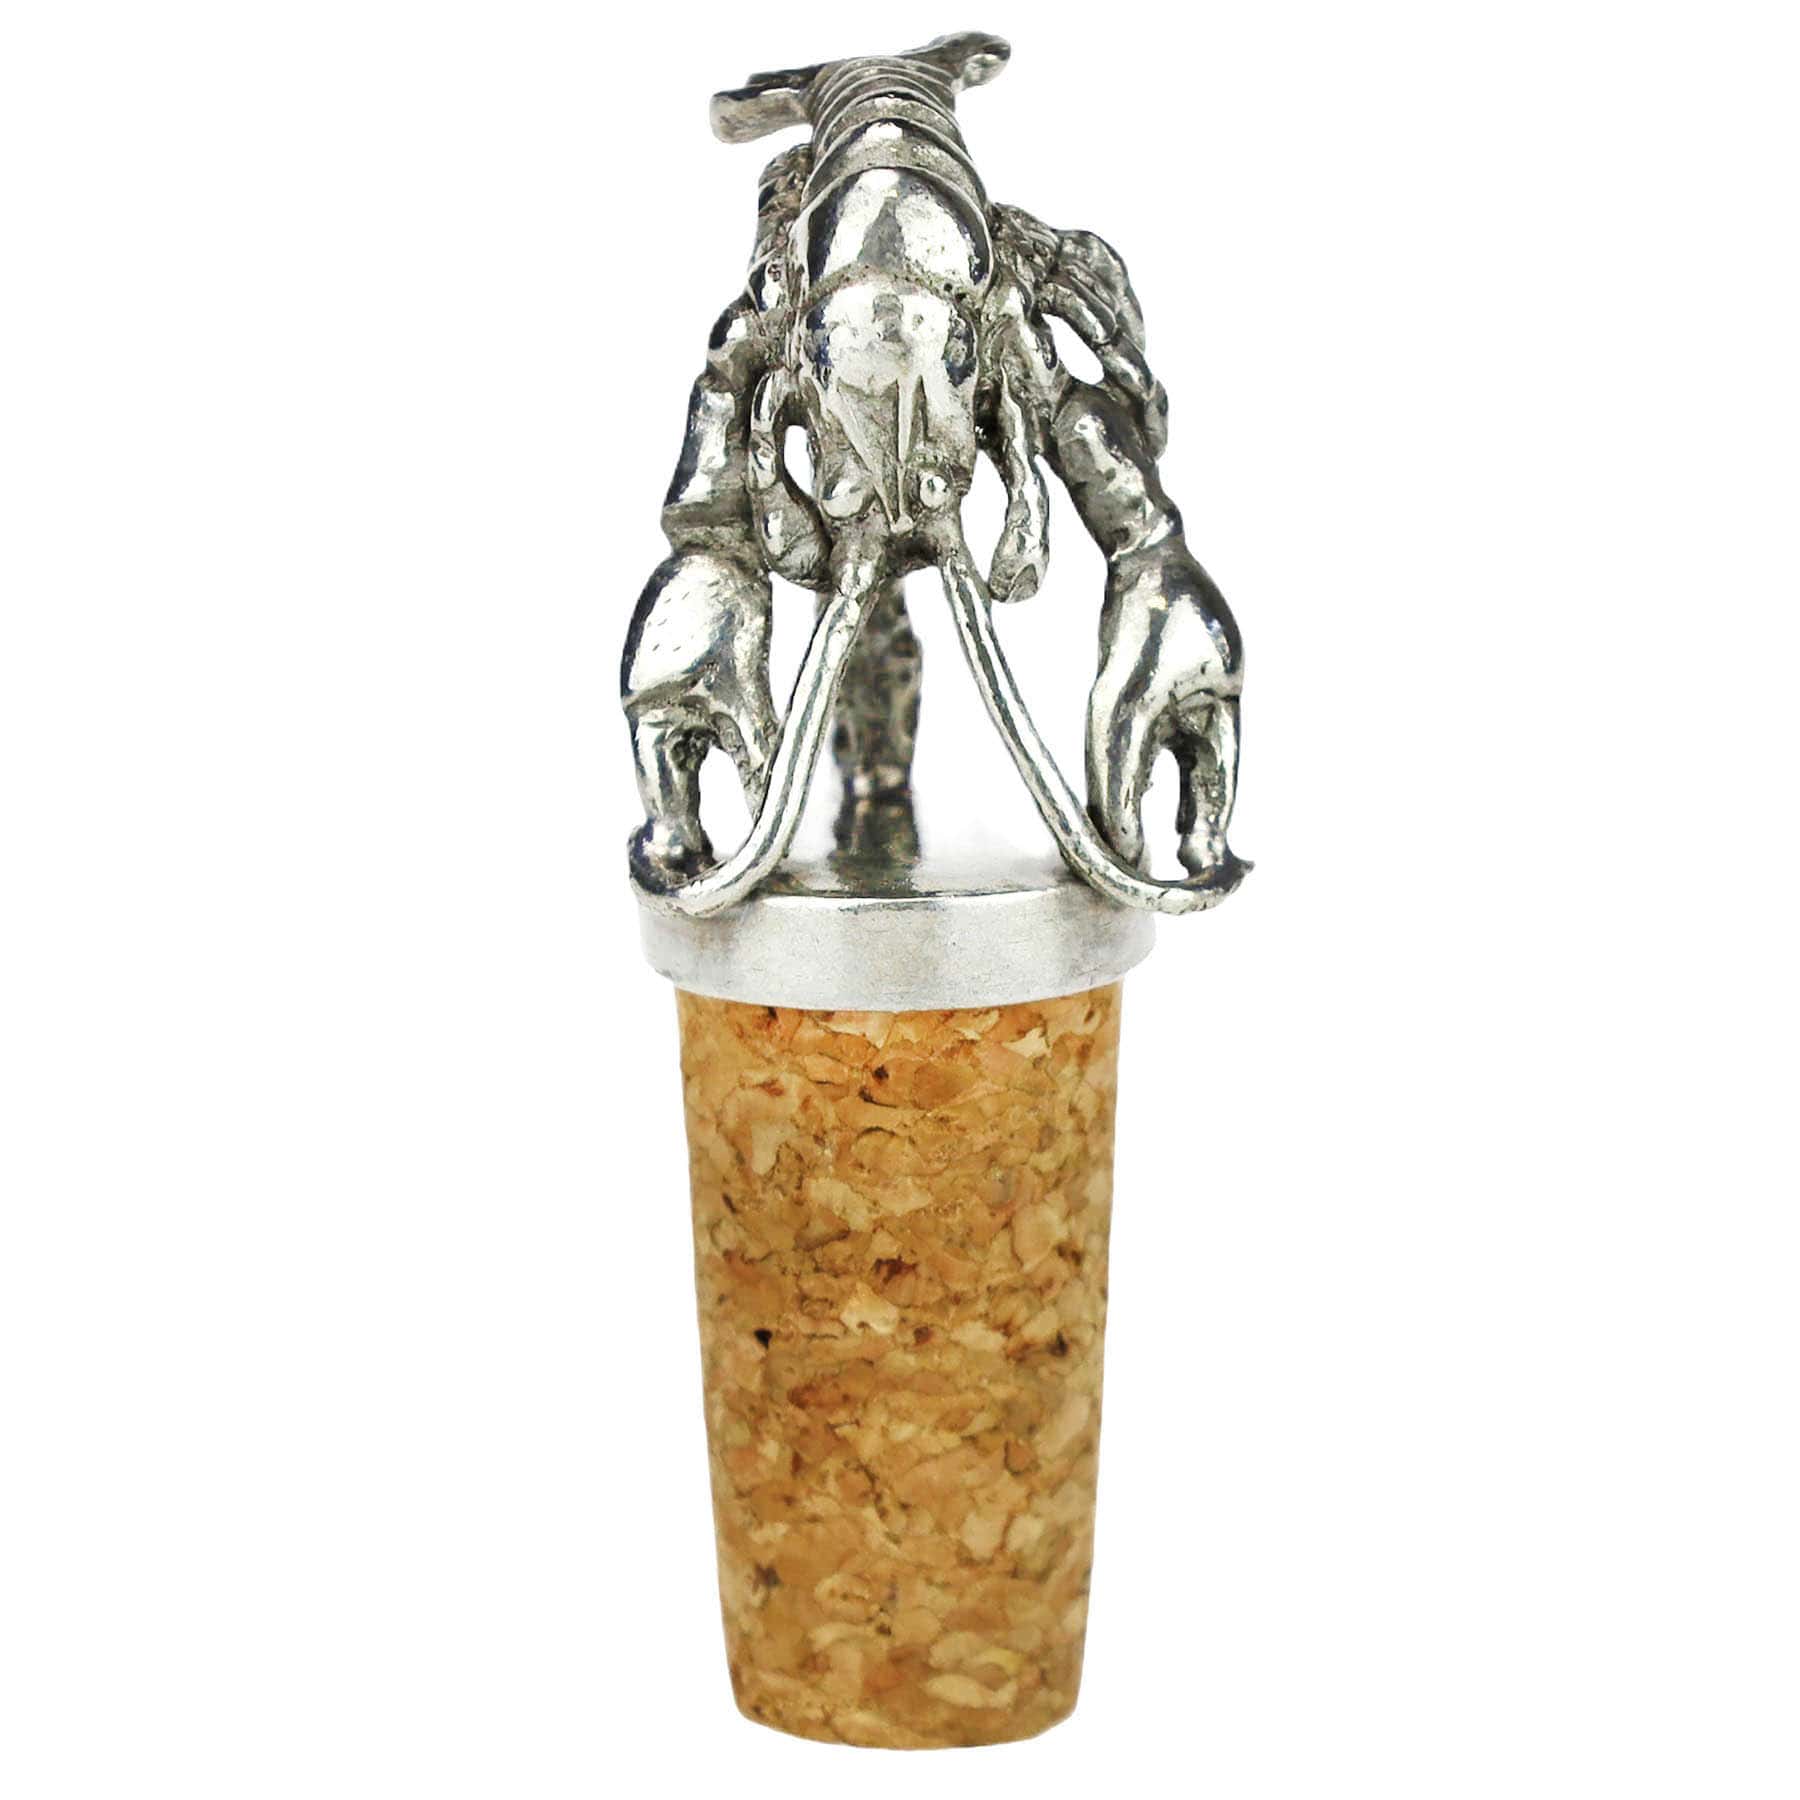 Pewter Lobster shaped Cork Stopper with body standing up ,showing the cork base